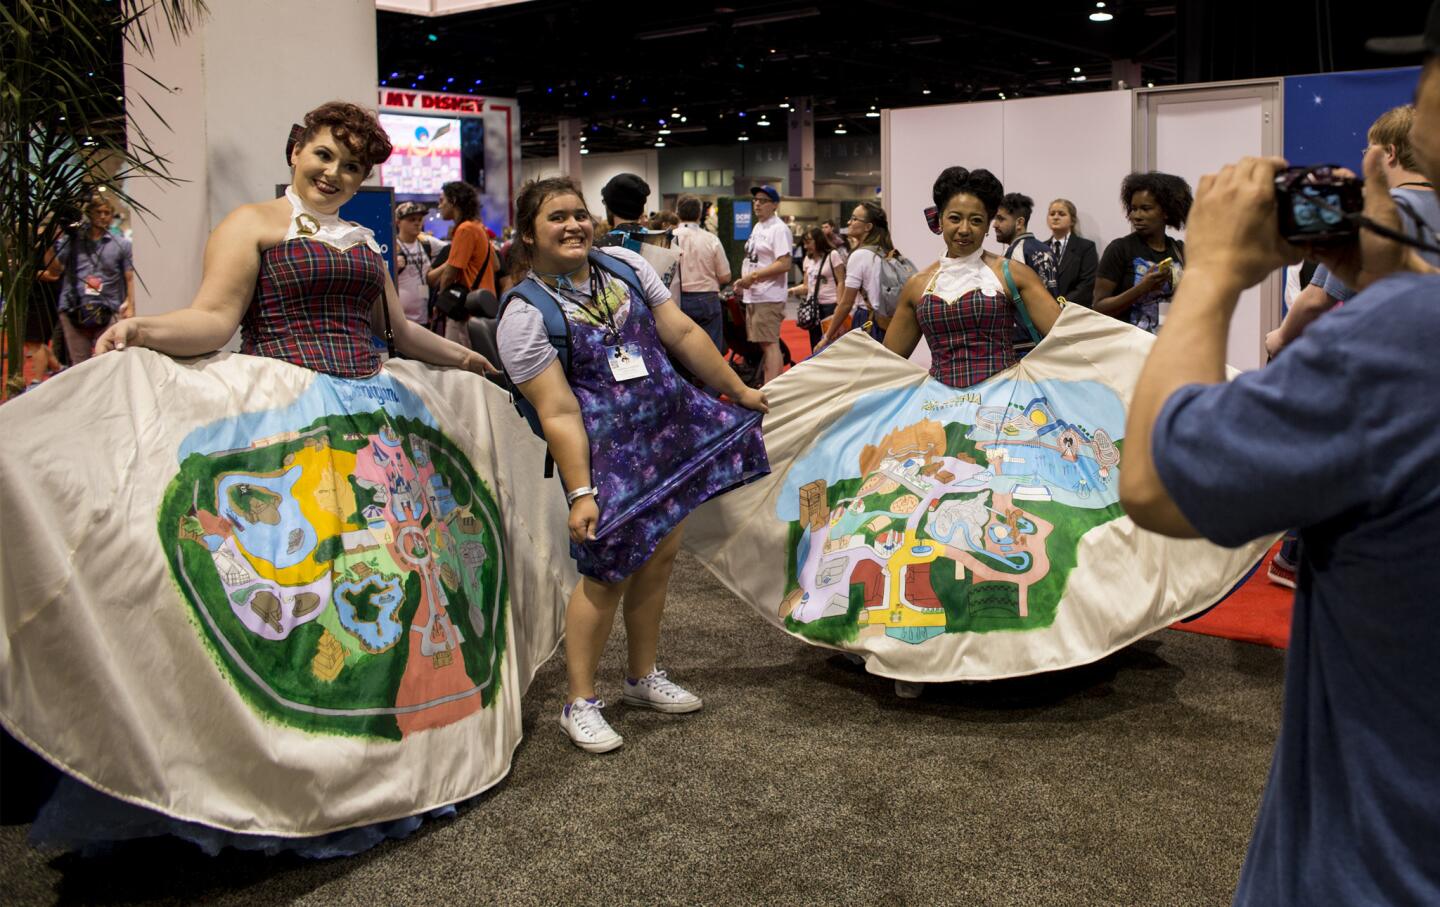 It's all things Disney at D23 Expo